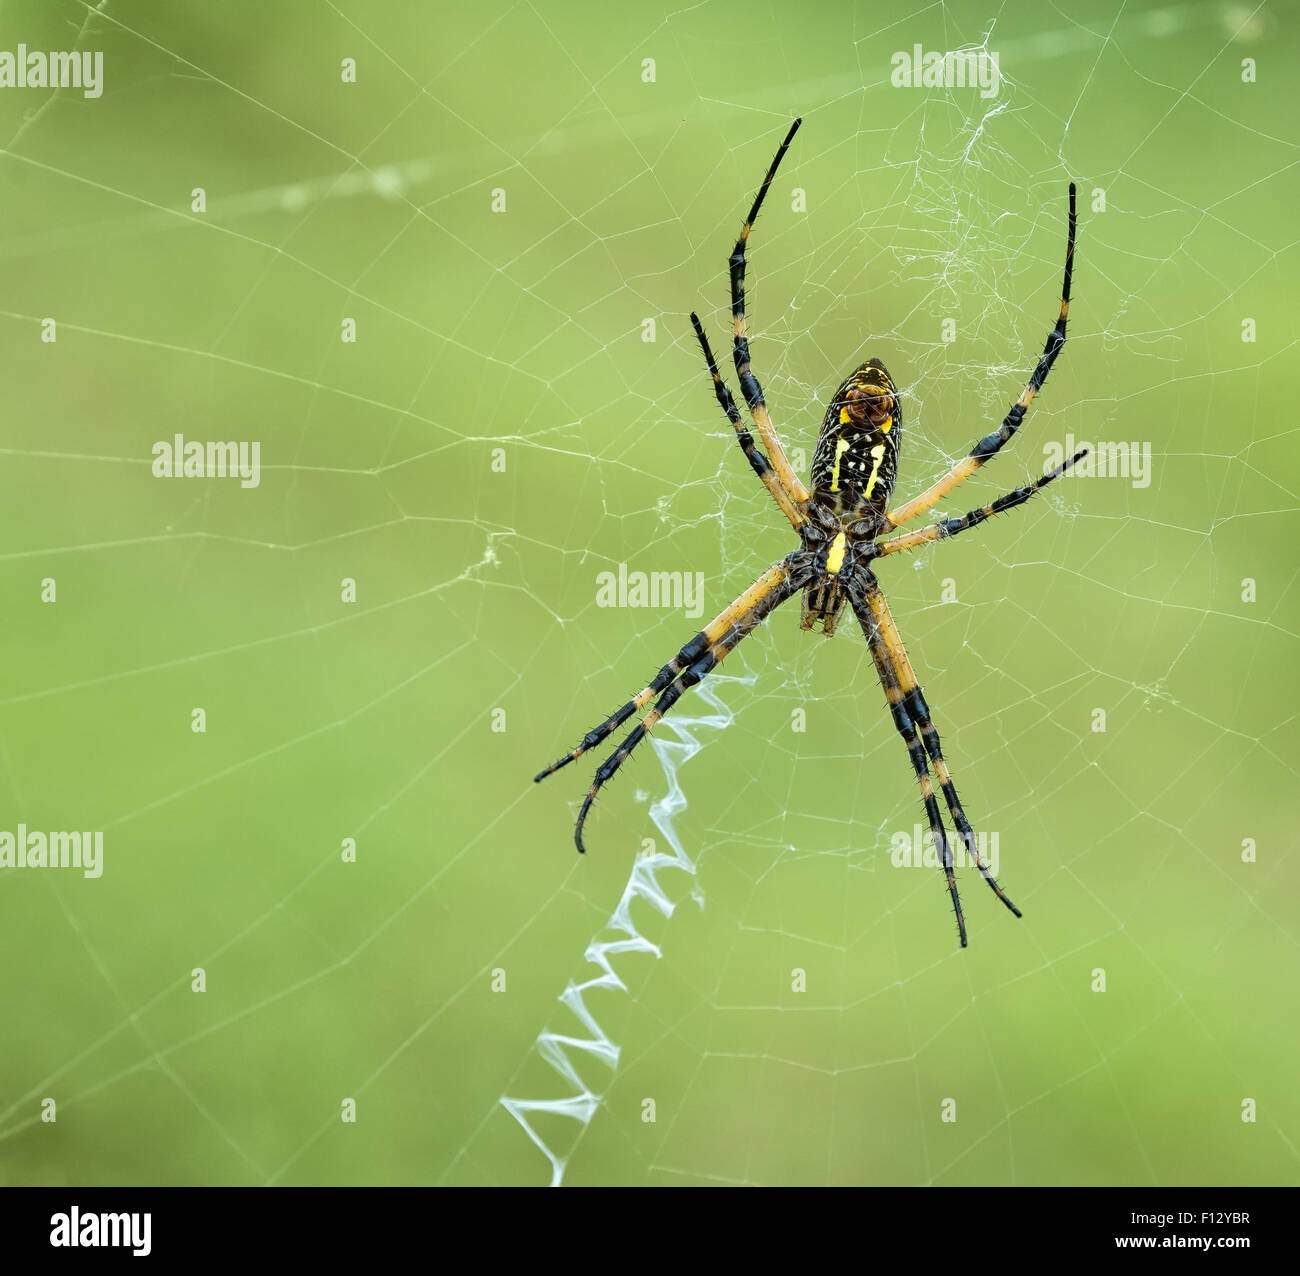 Black and Yellow Garden spider (Argiope aurantia) making a web Stock Photo